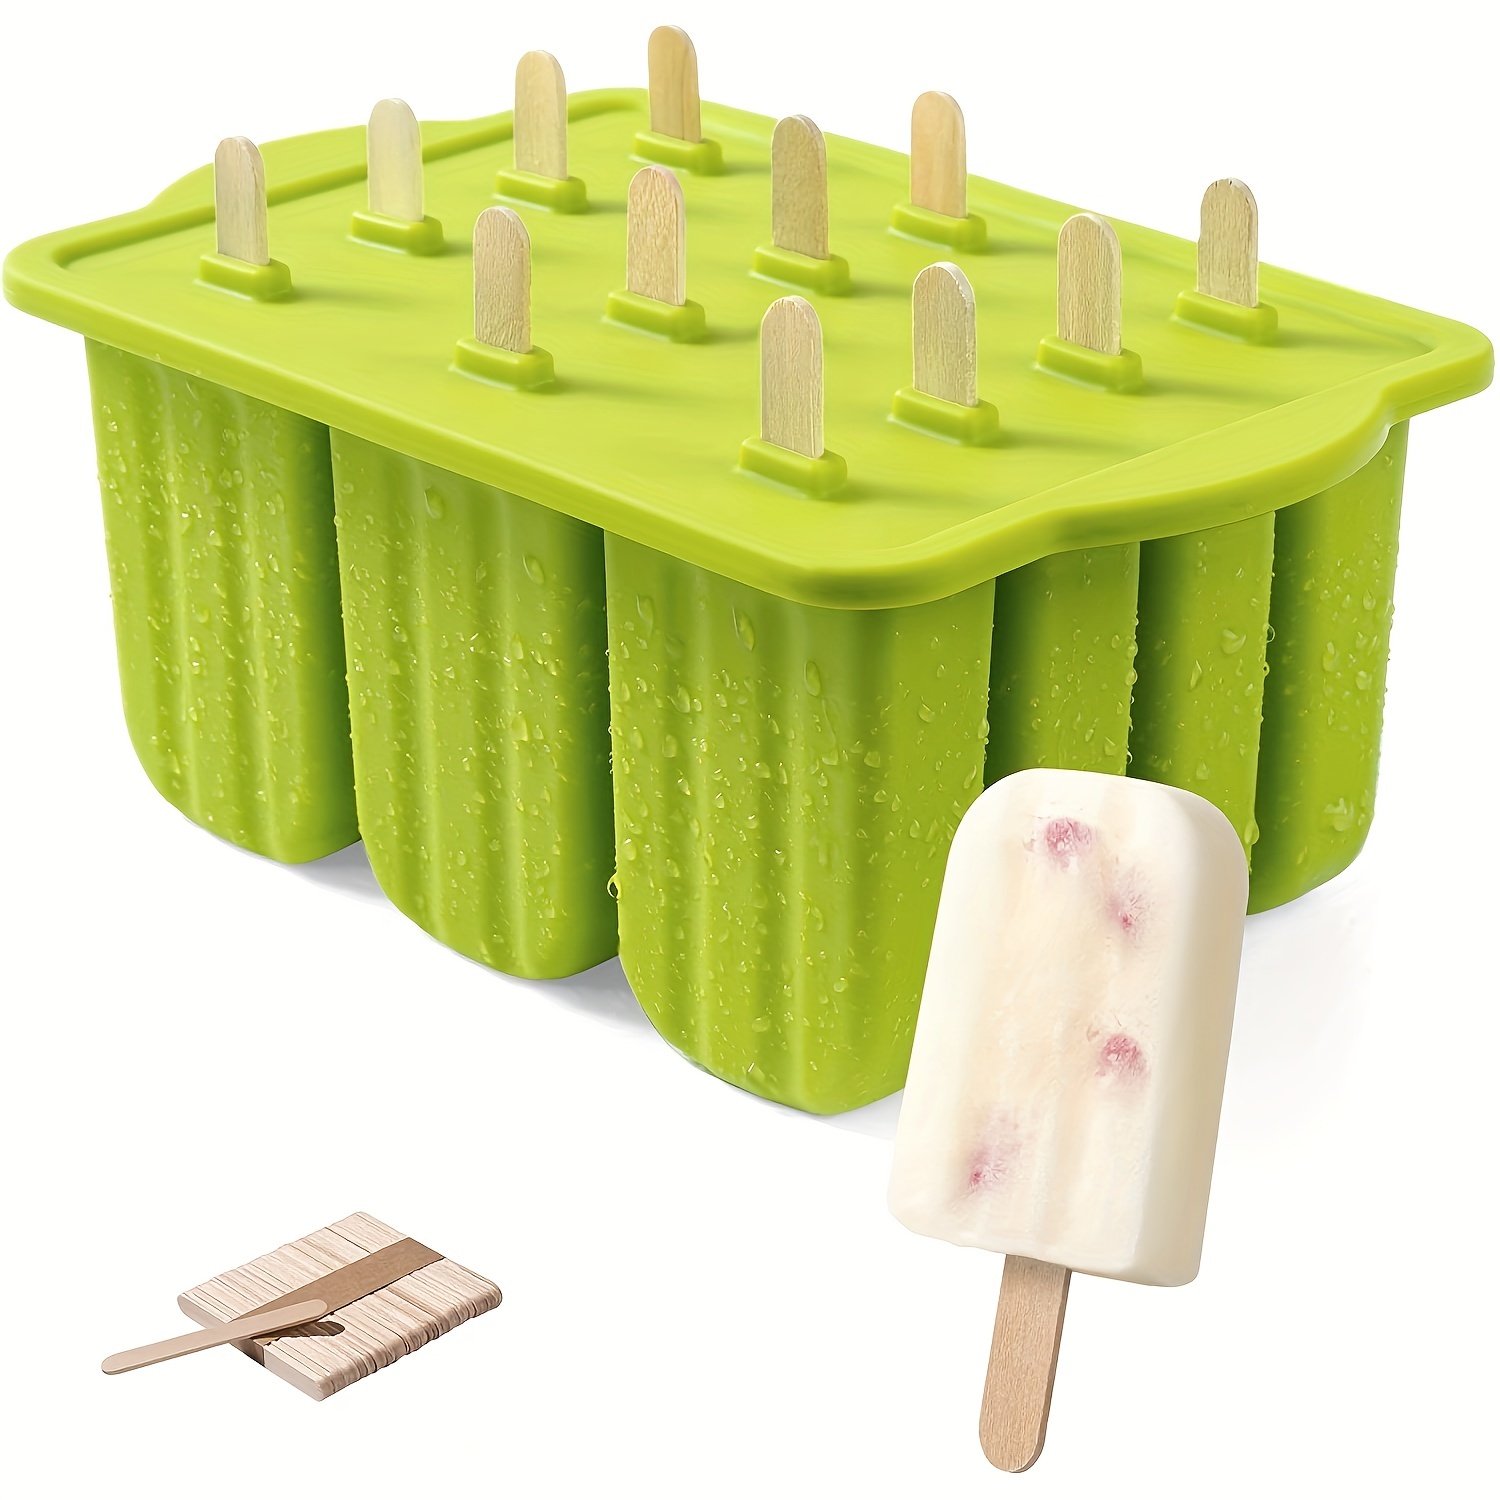 10 Reusable Silicone Popsicle Molds Diy Ice Cream Mold Bpa-free